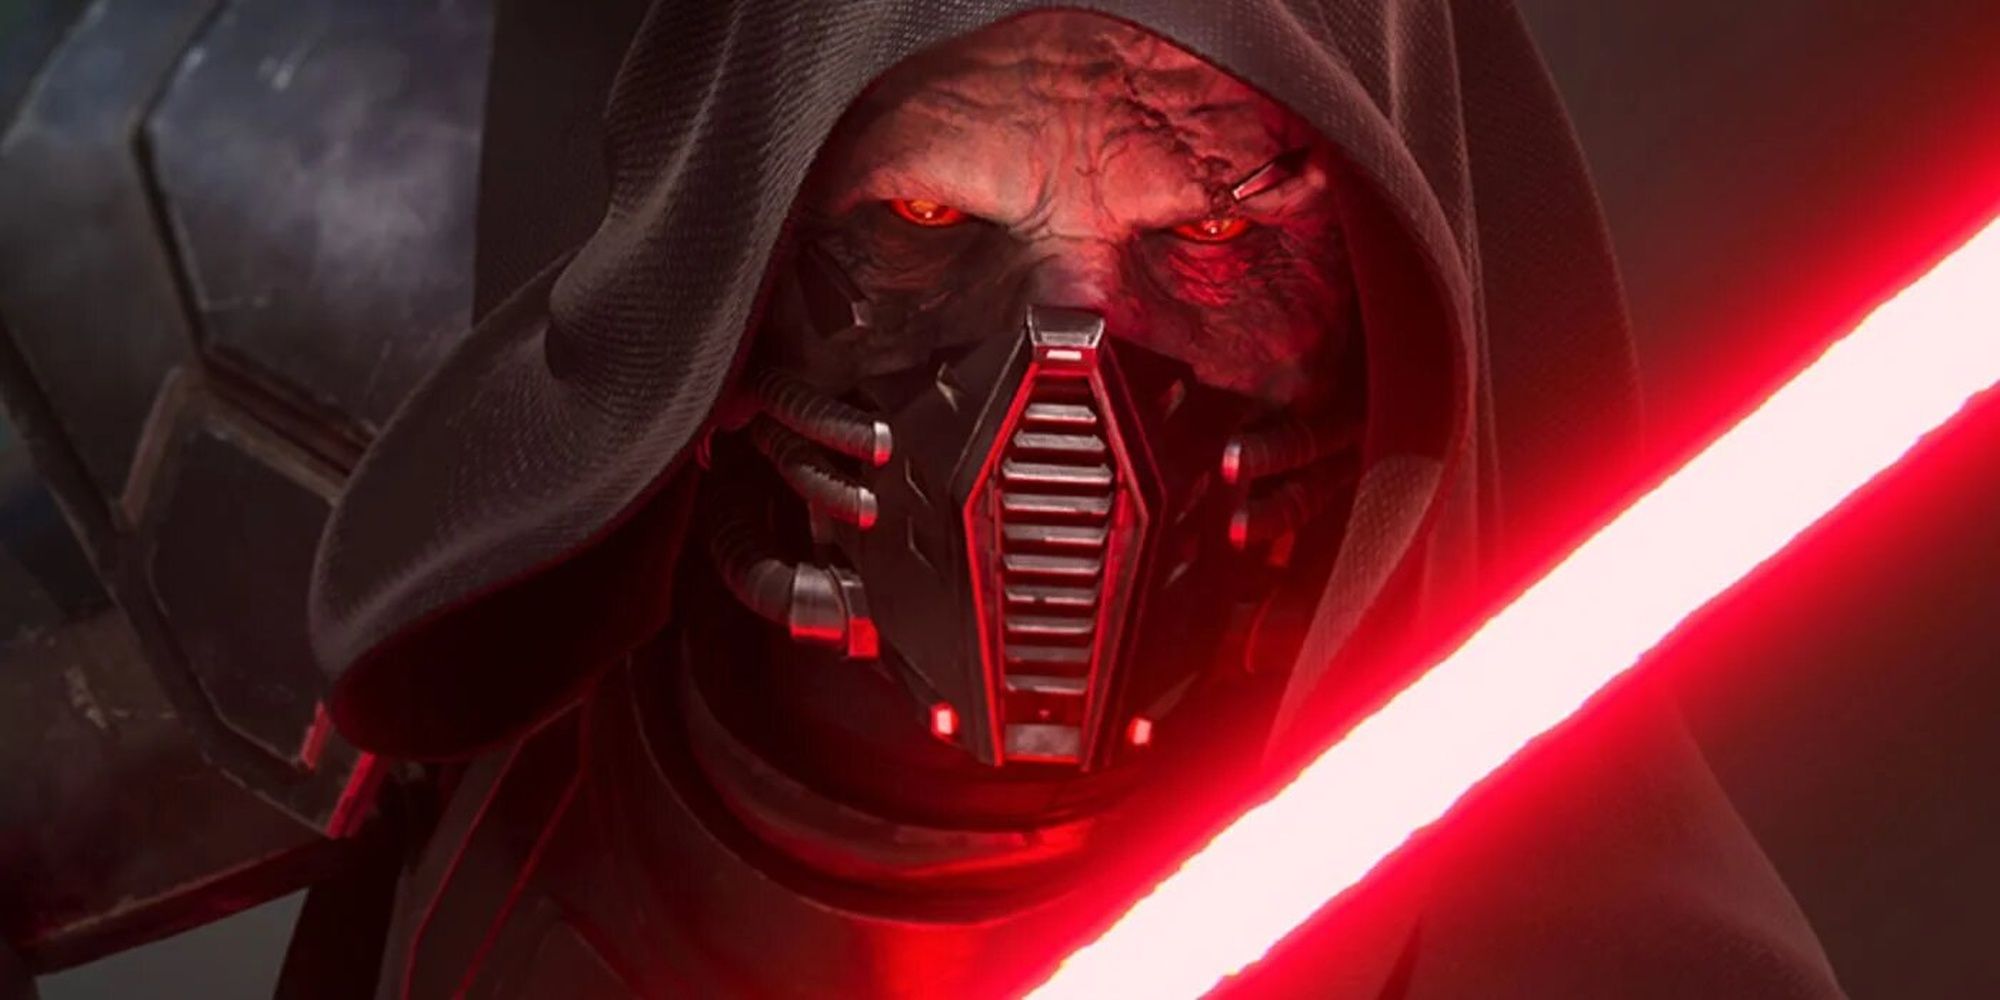 Darth Malgus with his lightsaber ignited.